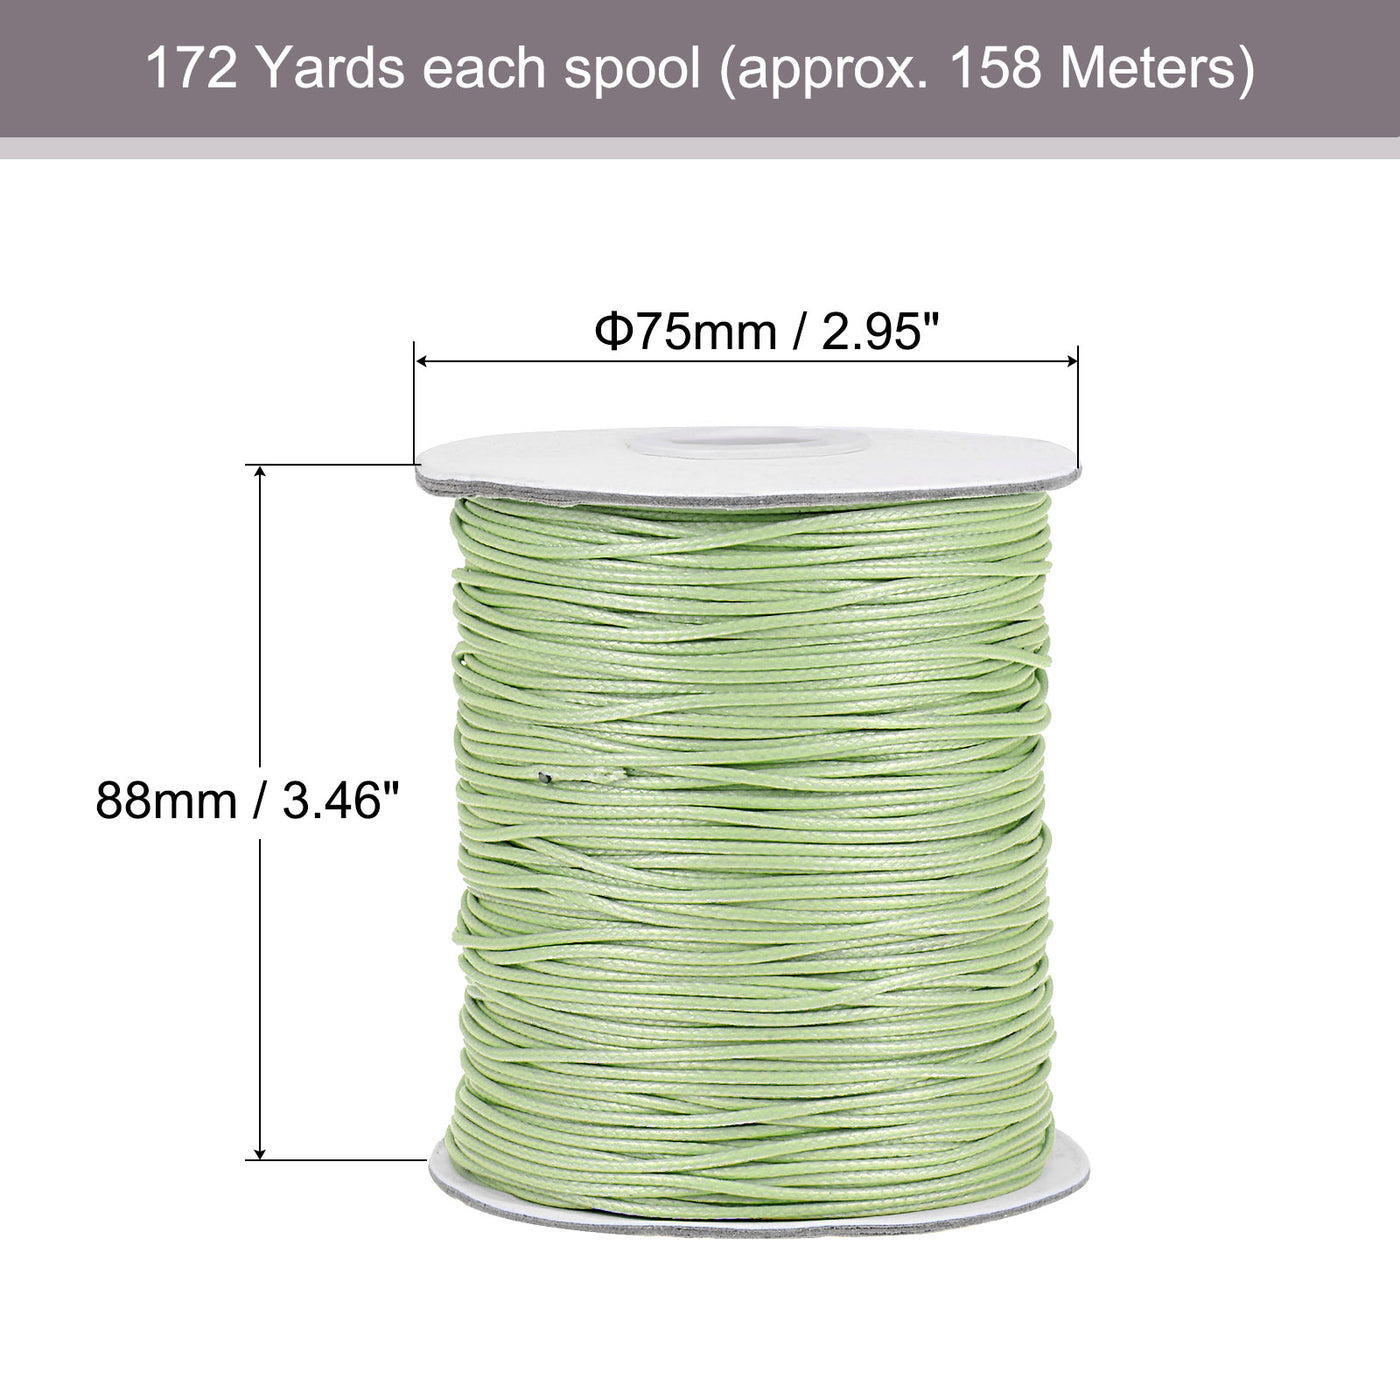 uxcell Uxcell 2pcs 1.2mm Waxed Polyester String 158M 172-Yard Bead Crafting Rope, Light Green